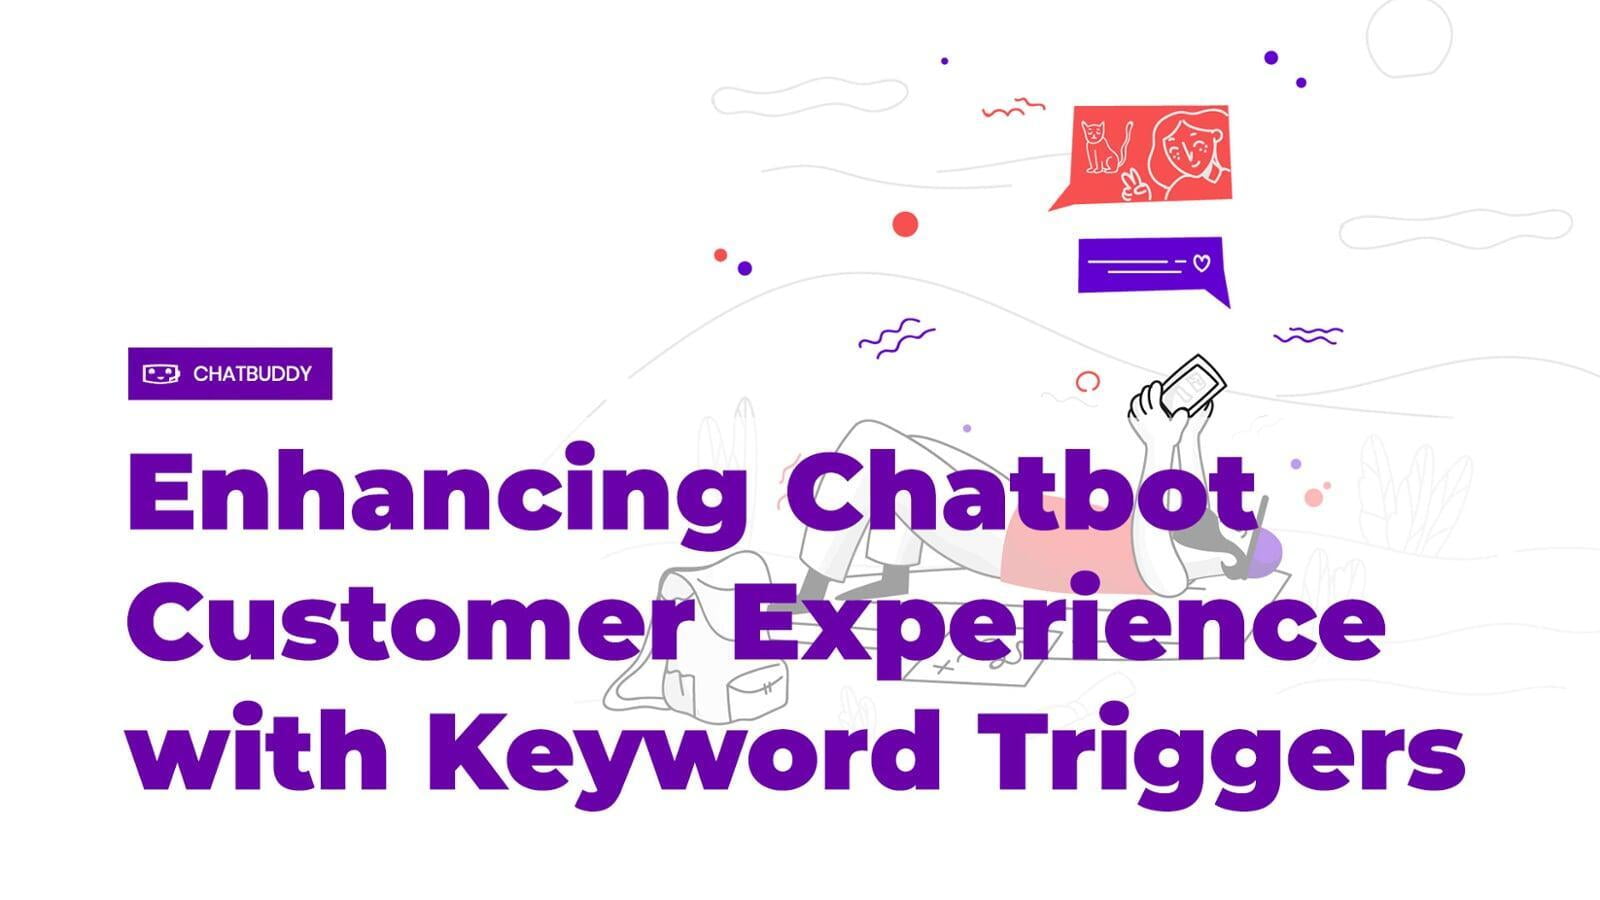 Enhancing Chatbot Customer Experience with Keyword Triggers